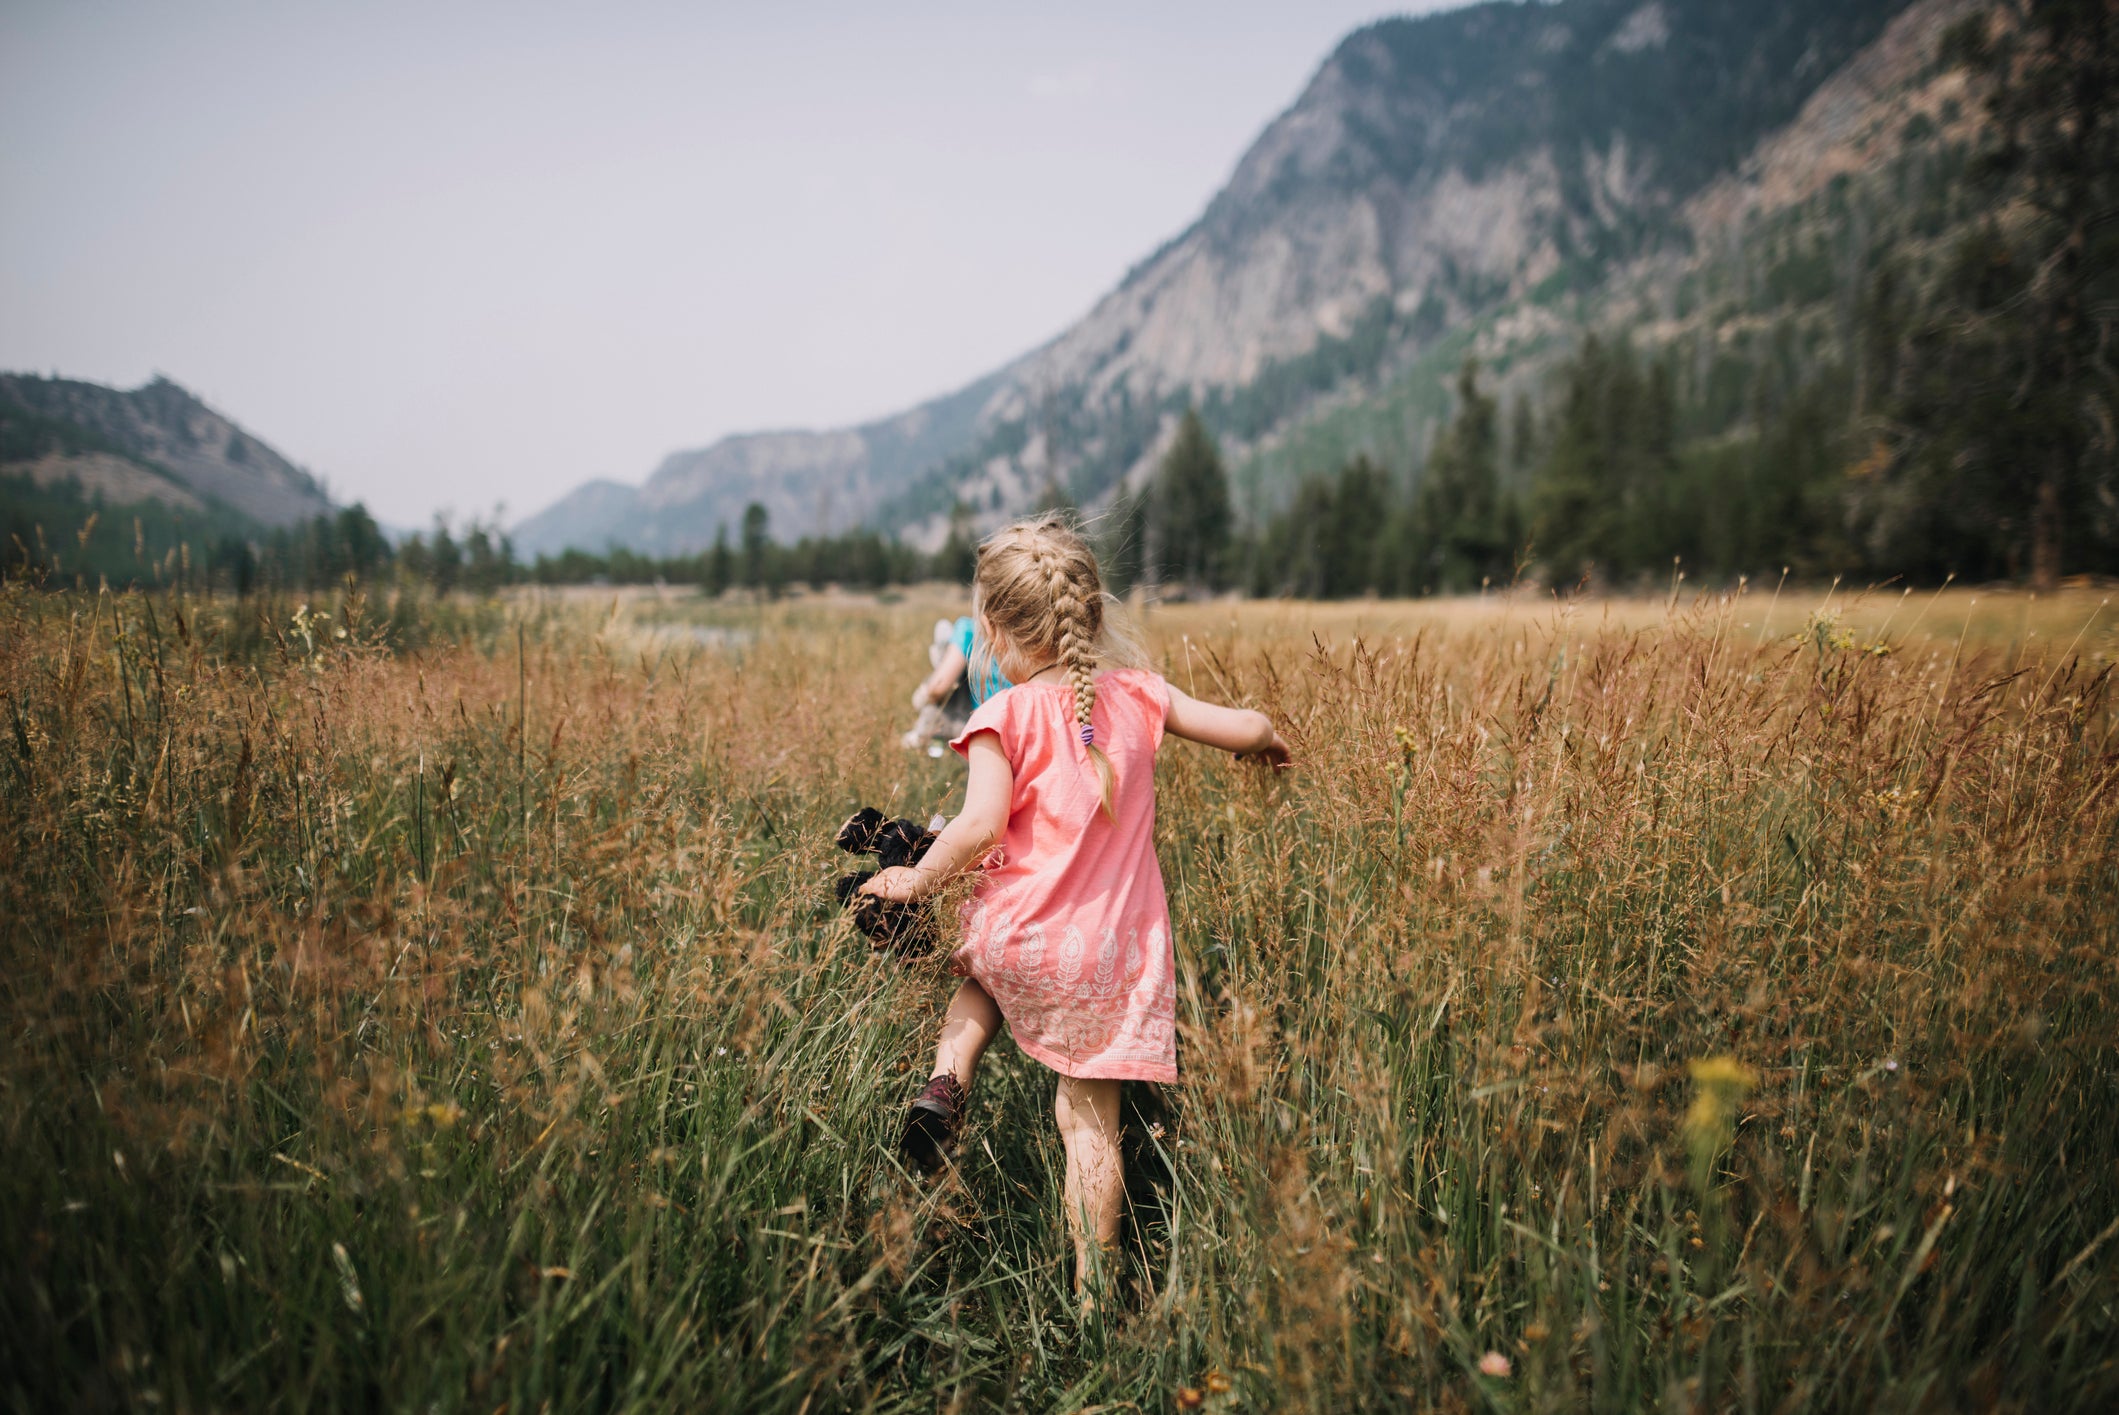 Rear view of carefree girl walking amidst grassy field against mountains at Yellowstone National Park